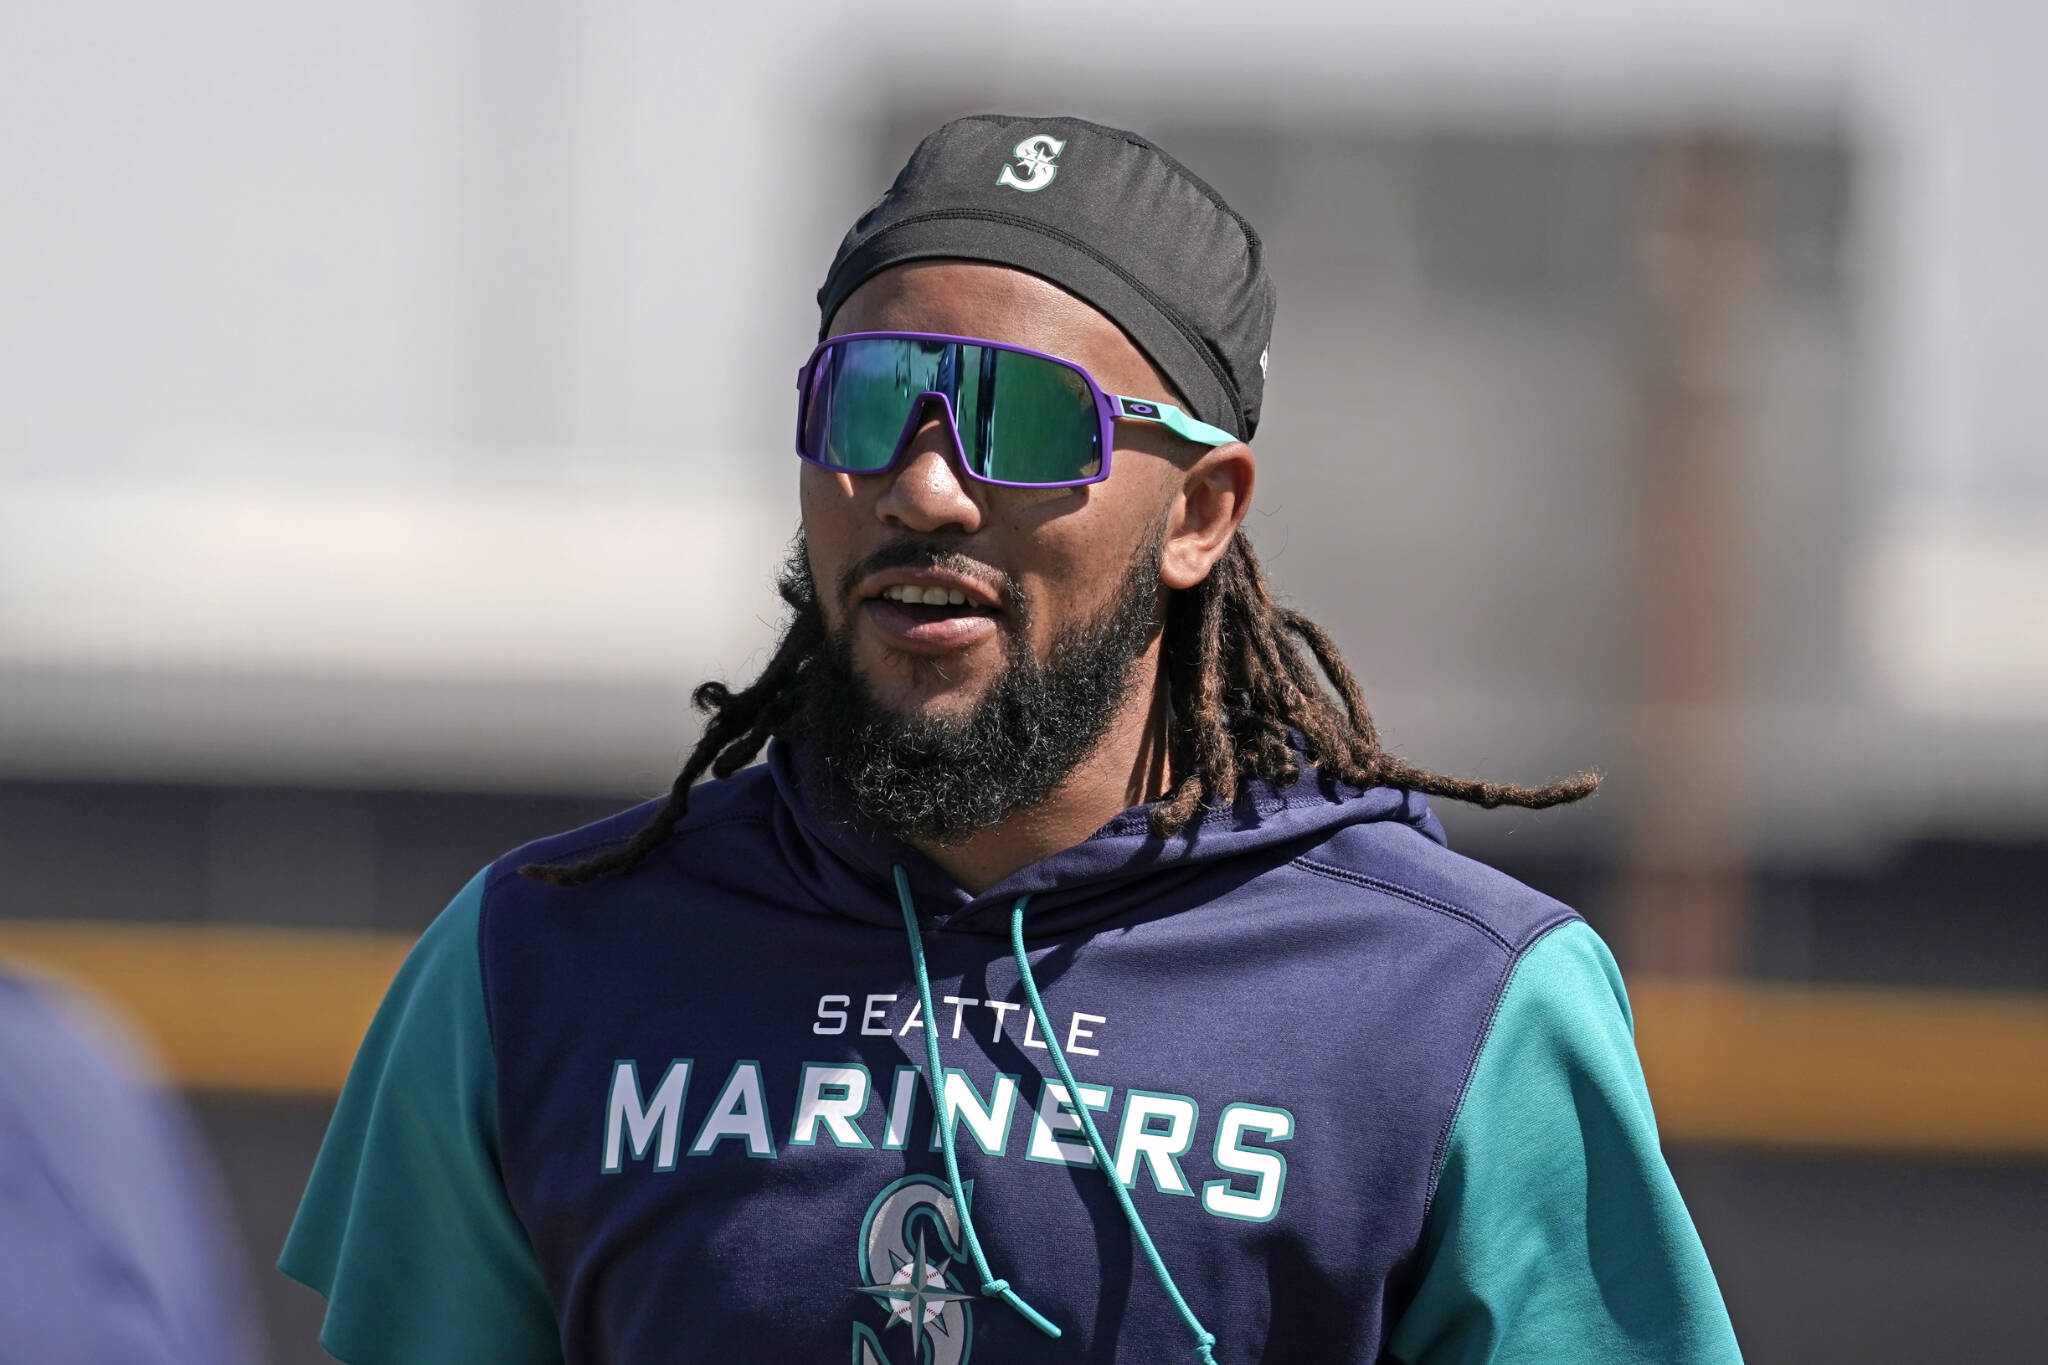 The Mariners’ J.P. Crawford watches batting practice during spring training baseball practice on March 16, 2022, in Peoria, Ariz. (AP Photo/Charlie Riedel)